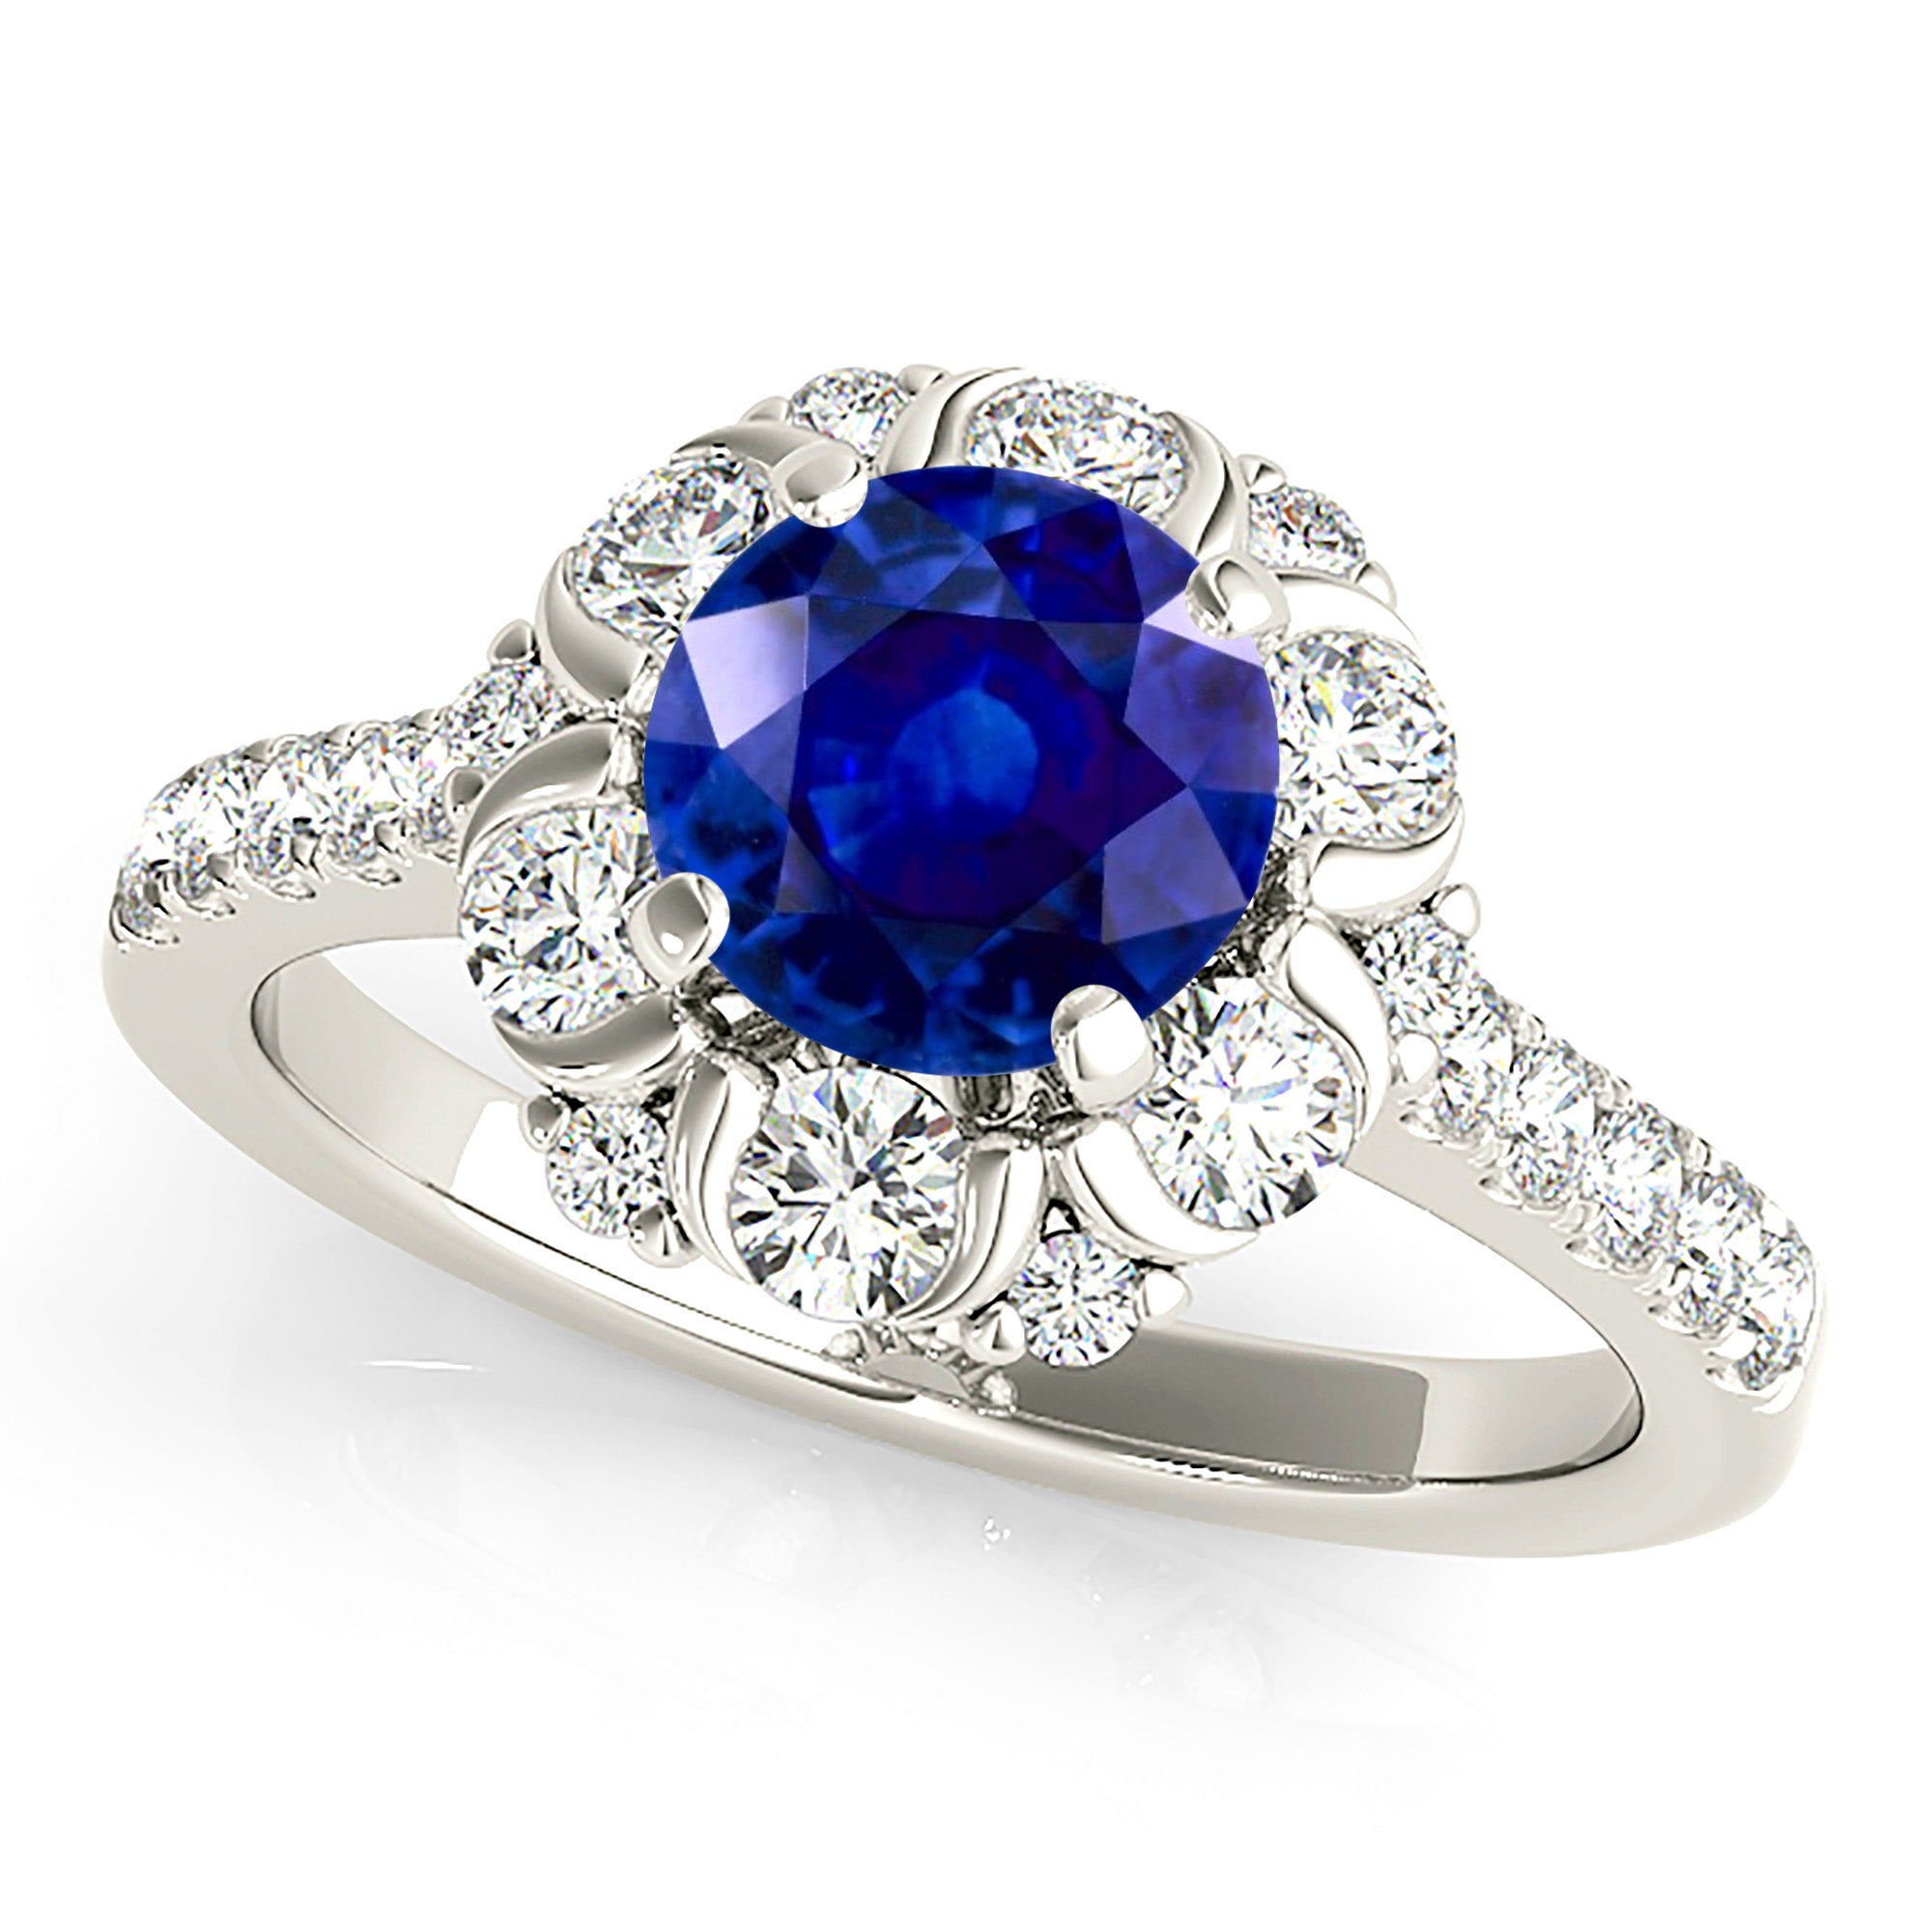 1.35 ct. Genuine Blue Sapphire Ring With 0.90 ctw. Diamond Floral Halo, Delicate Diamond Band | Natural Sapphire And Diamond Gemstone Ring-in 14K/18K White, Yellow, Rose Gold and Platinum - Christmas Jewelry Gift -VIRABYANI